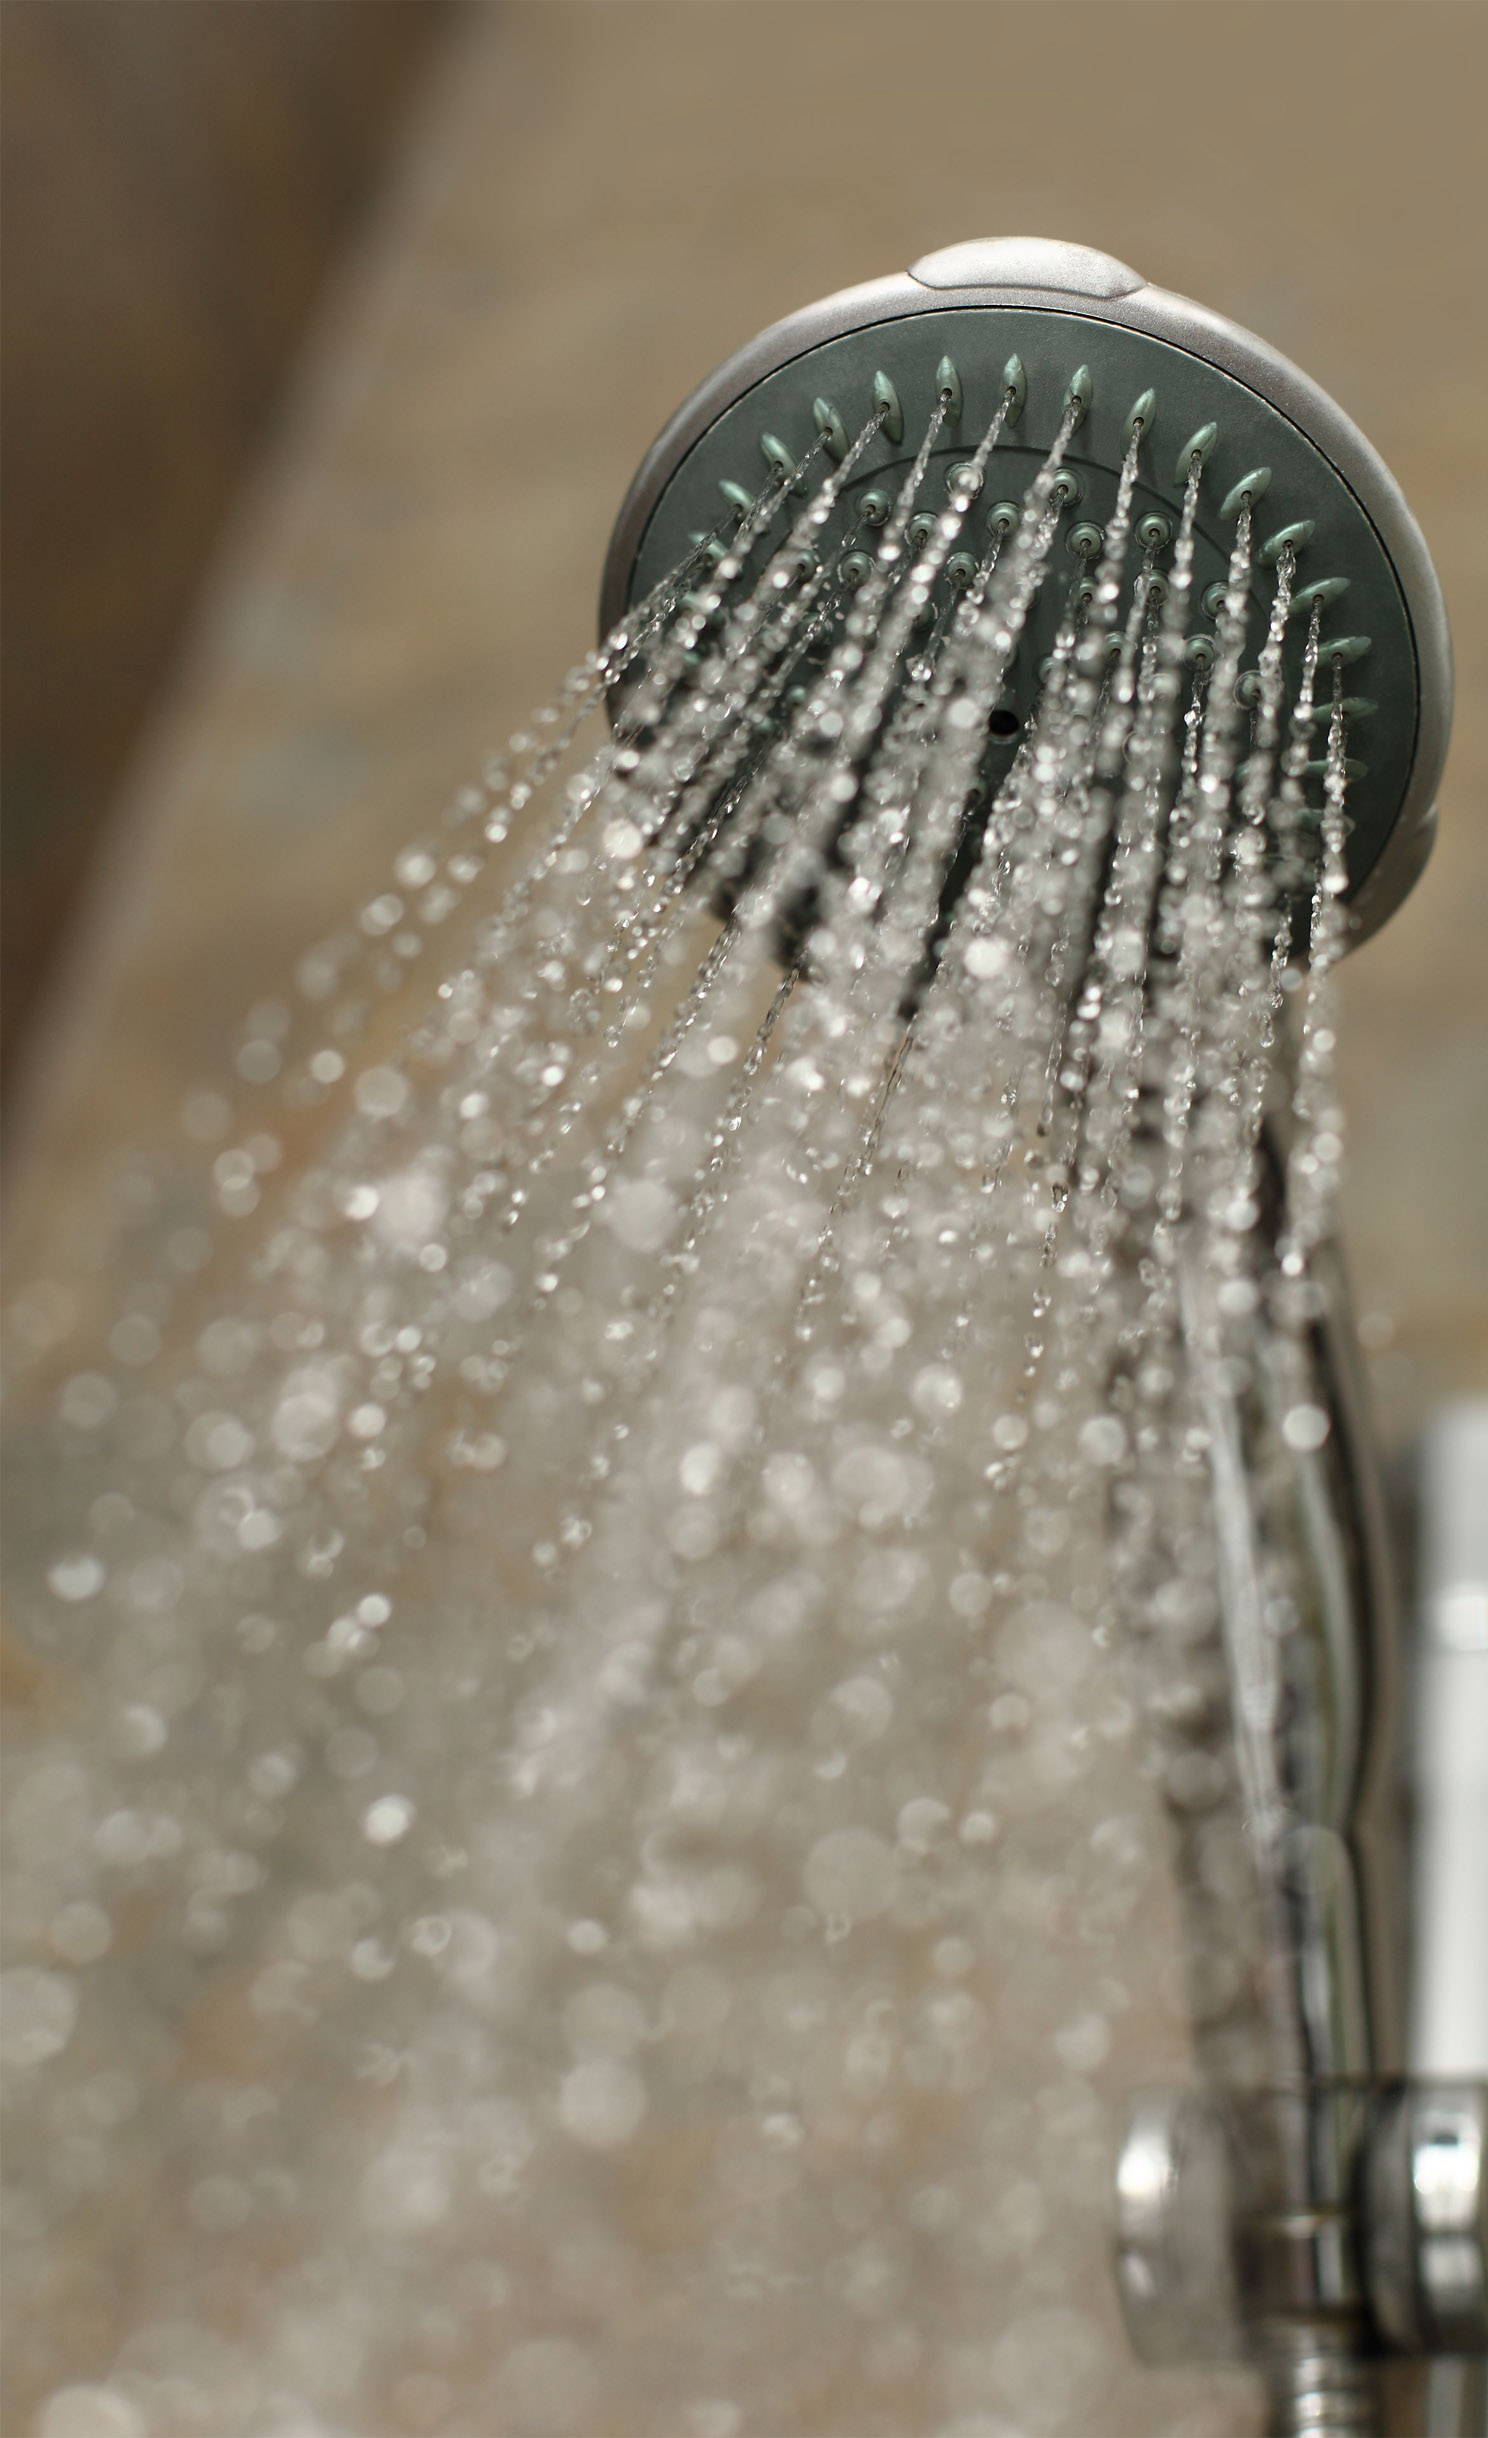 Dangerous bacteria could be hiding in your showerhead